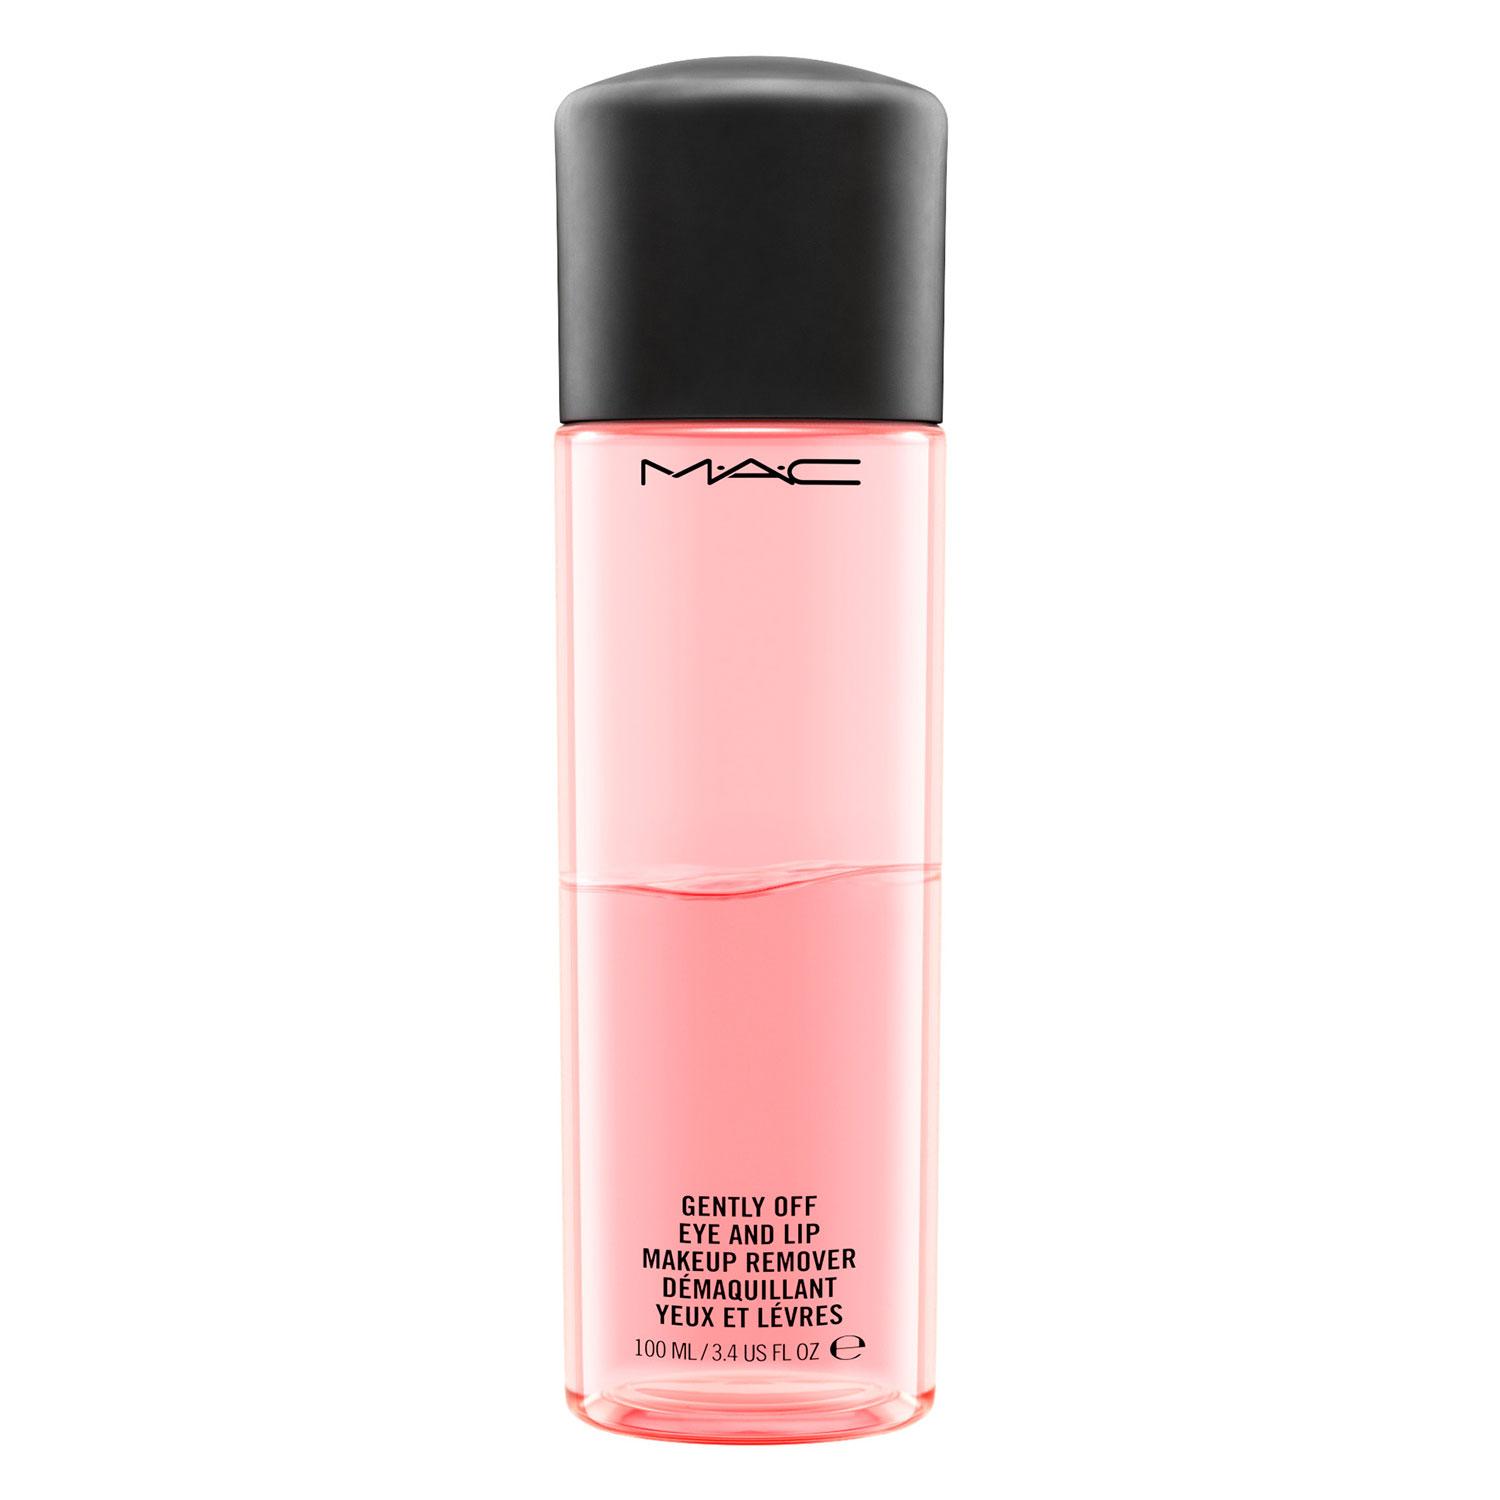 M·A·C Skin Care - Gently Off Eye and Lip Makeup Remover